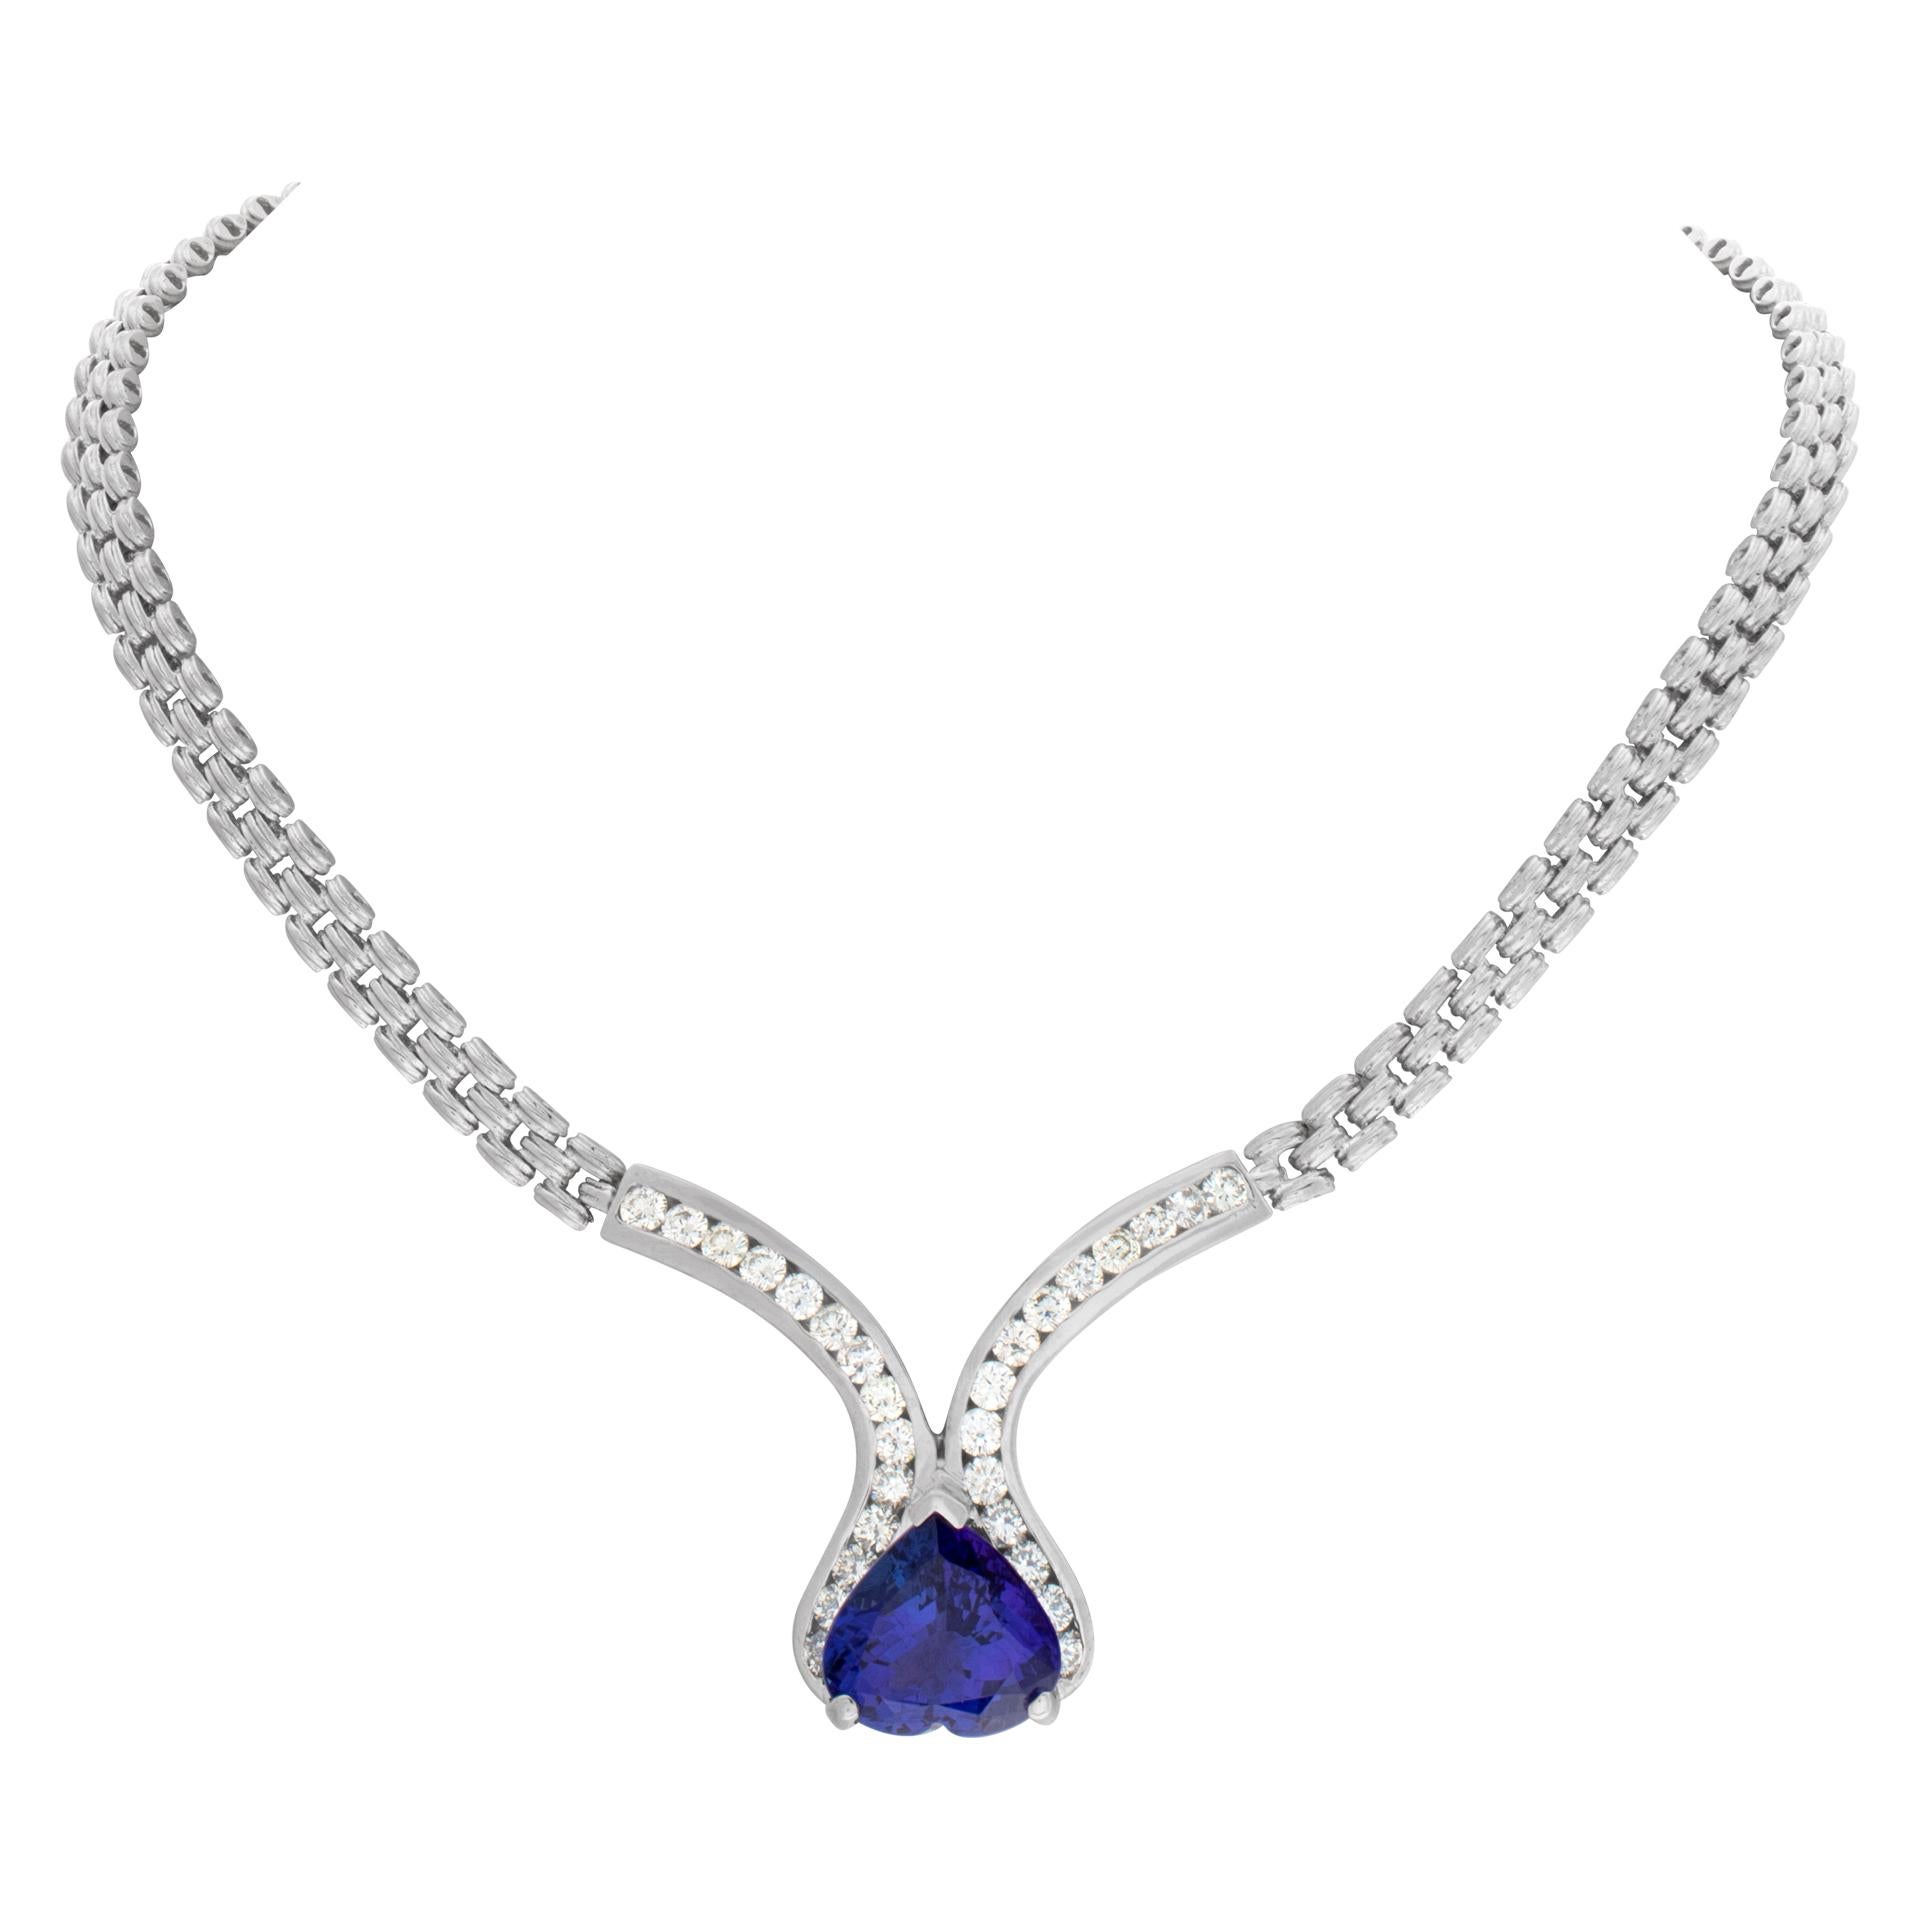 Glamorous necklace with a 13.15 carat heart shape tanzanite surrounded by approx. 3.30 carat full cut, round brilliant diamonds set in 14k white gold. Diamonds estimate; G/H color. VS clarity. Heavy solid link chain/necklace is 16 inches cb .
